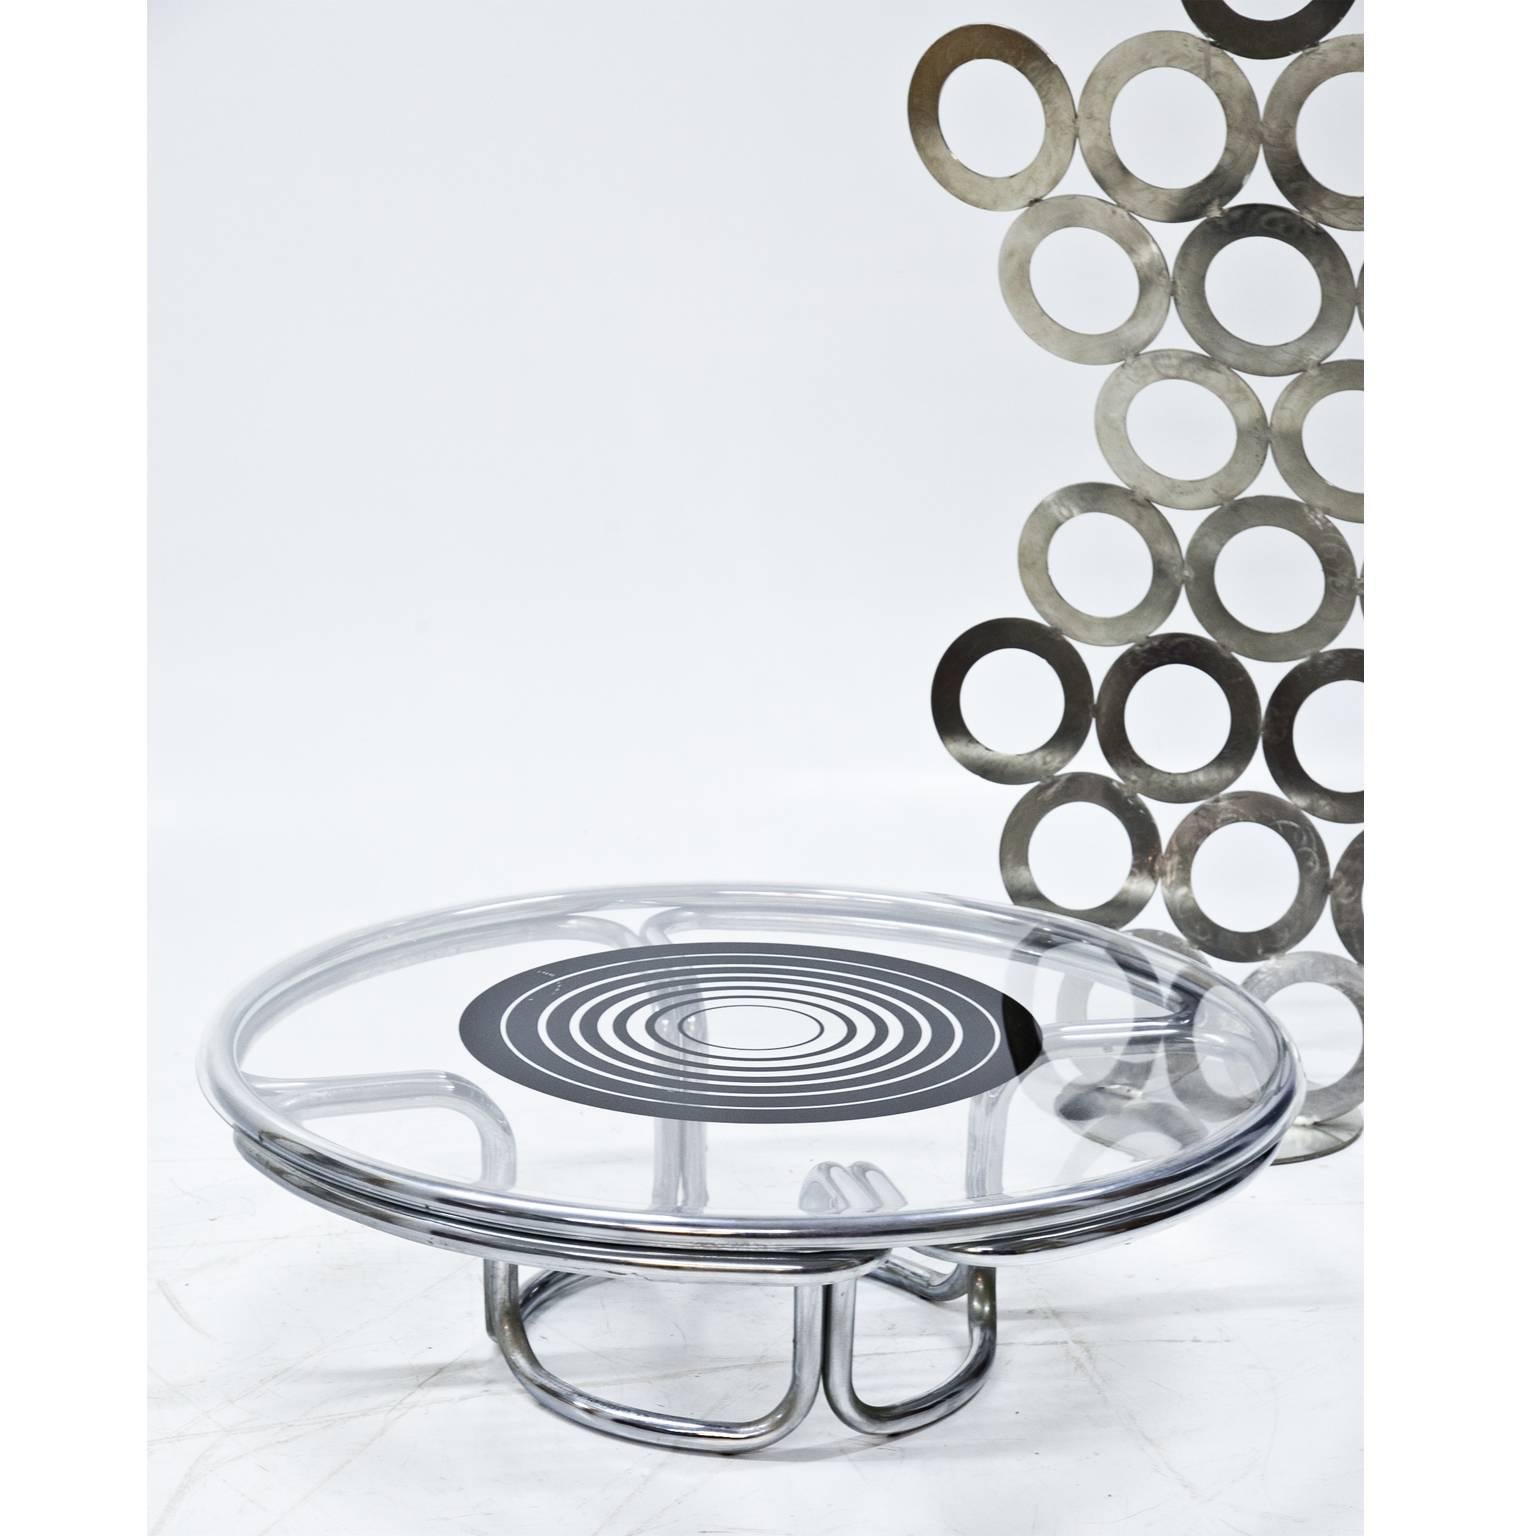 Coffee table on a bent and chromed metal frame. The round tabletop has some black circles printed on it and is made out of plastic.